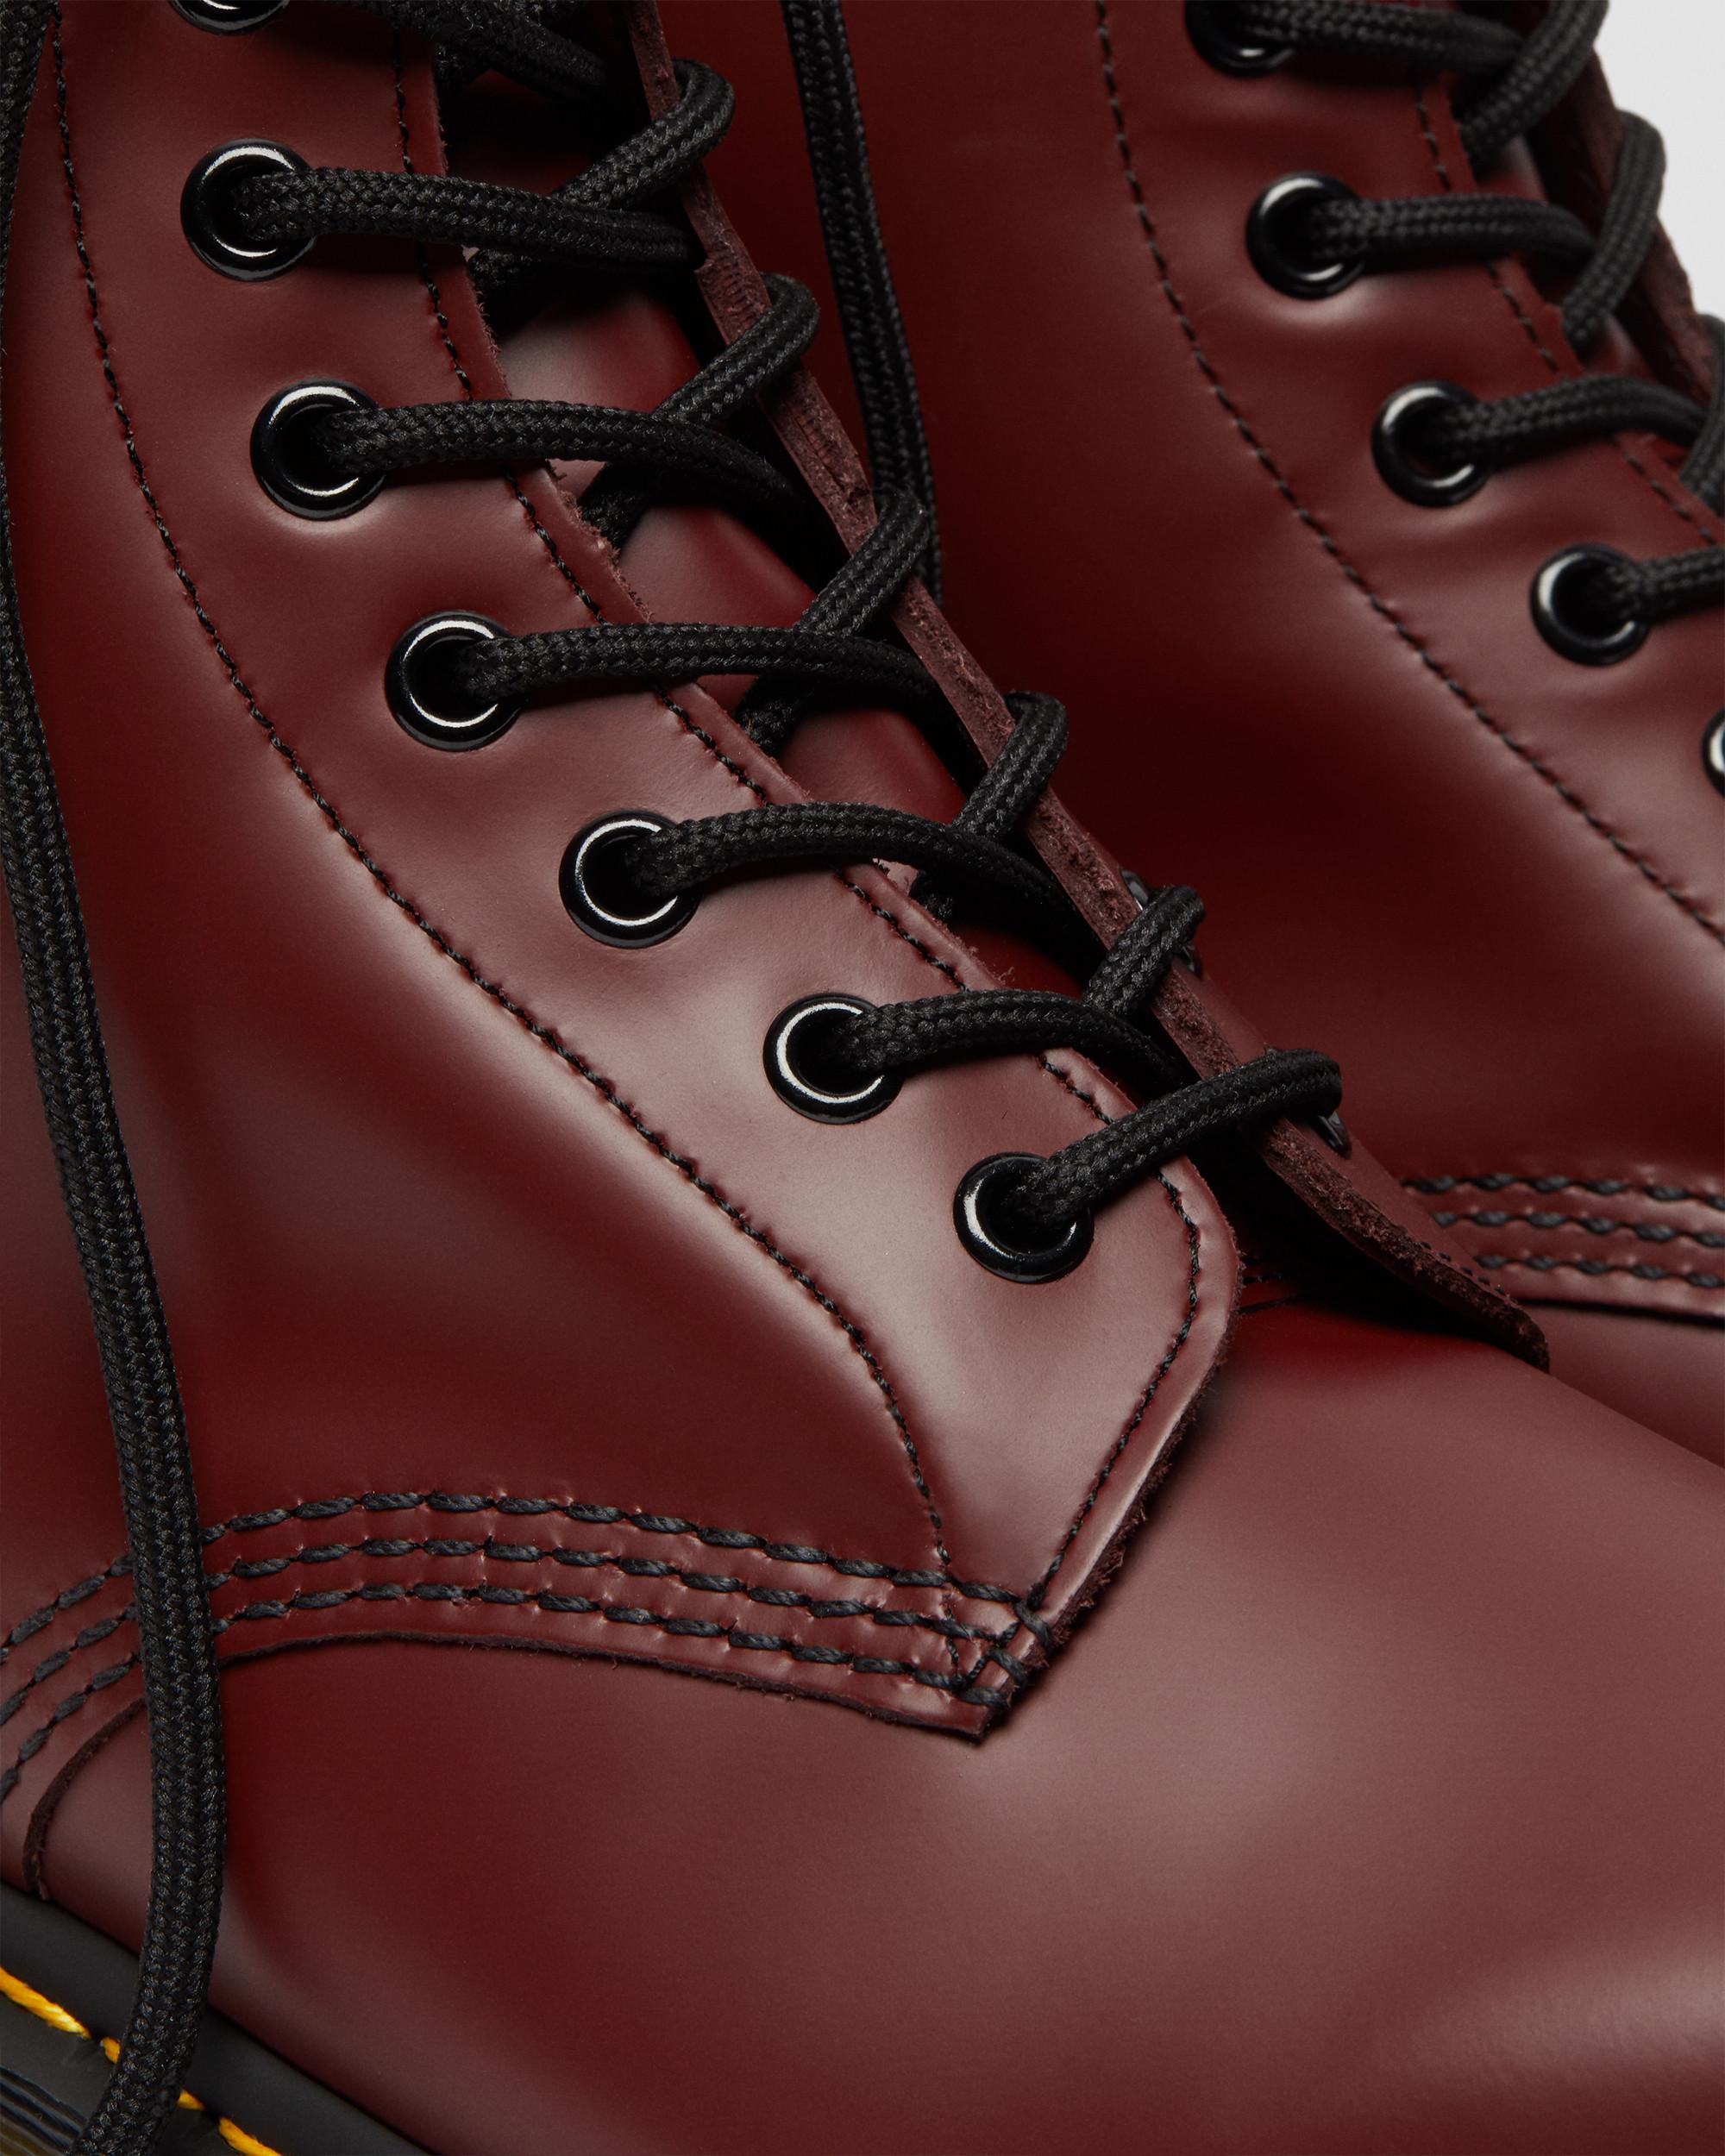 dr martens 10 hole cherry red